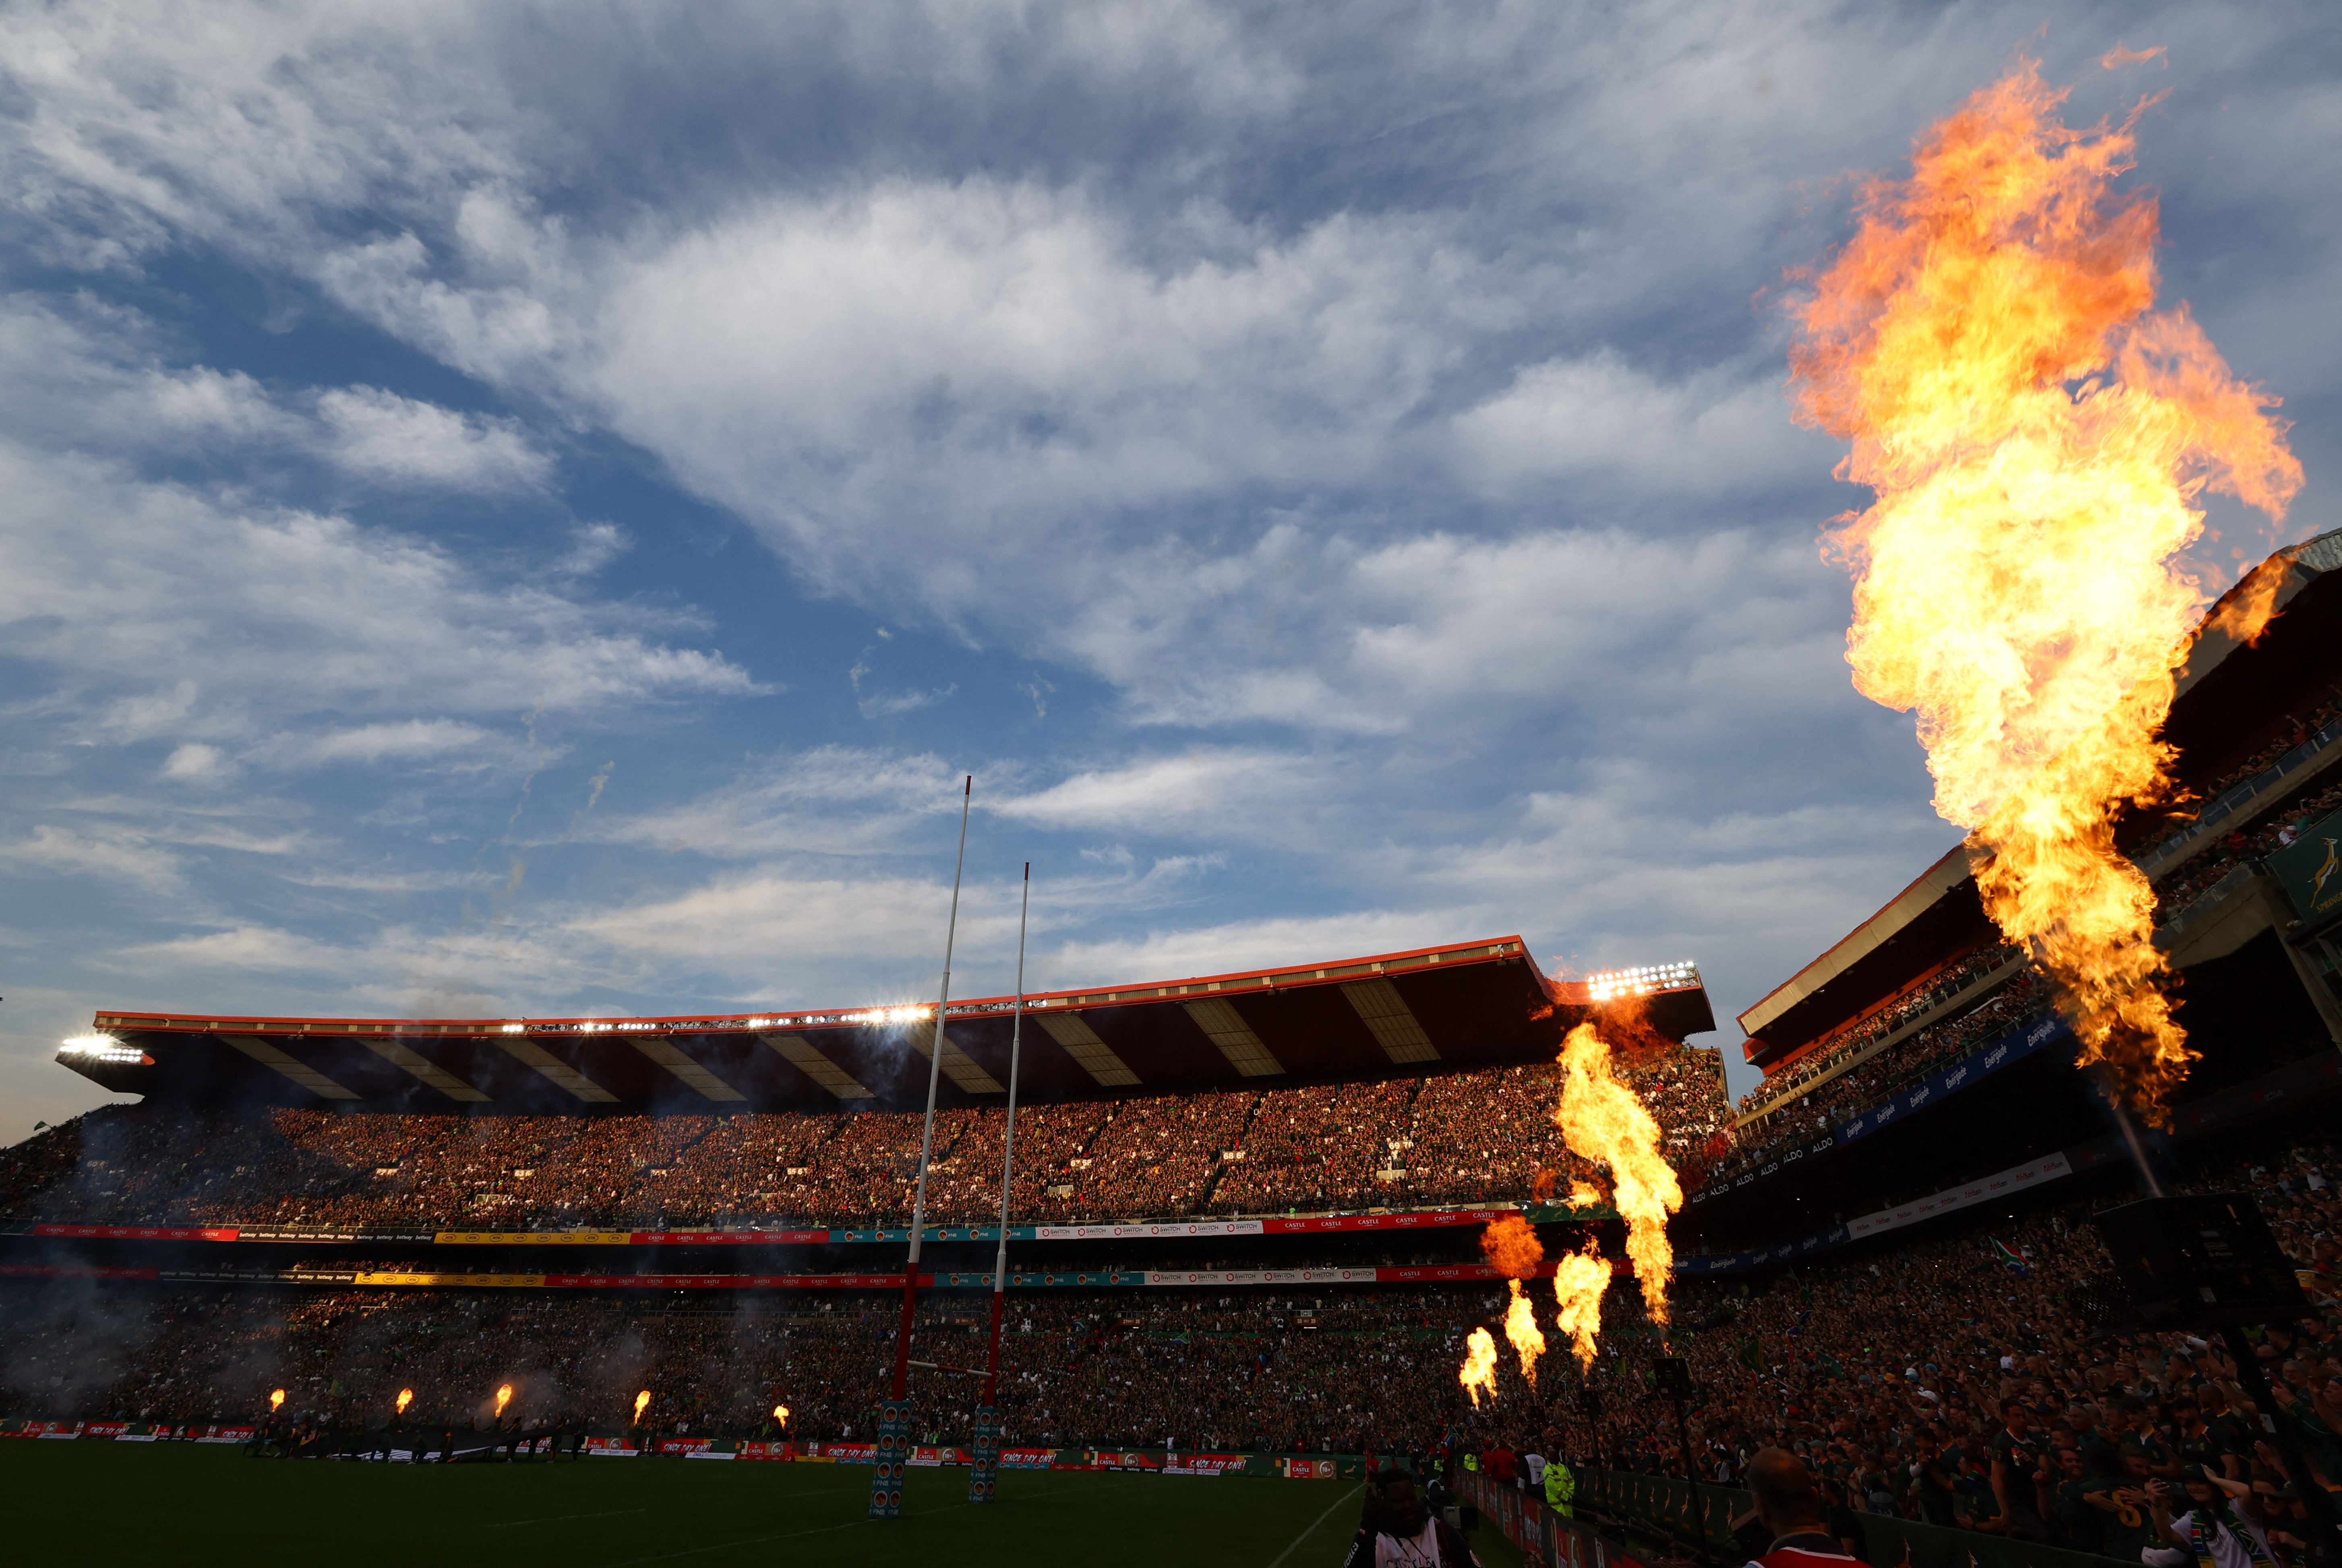 Rugby Championship - South Africa v New Zealand